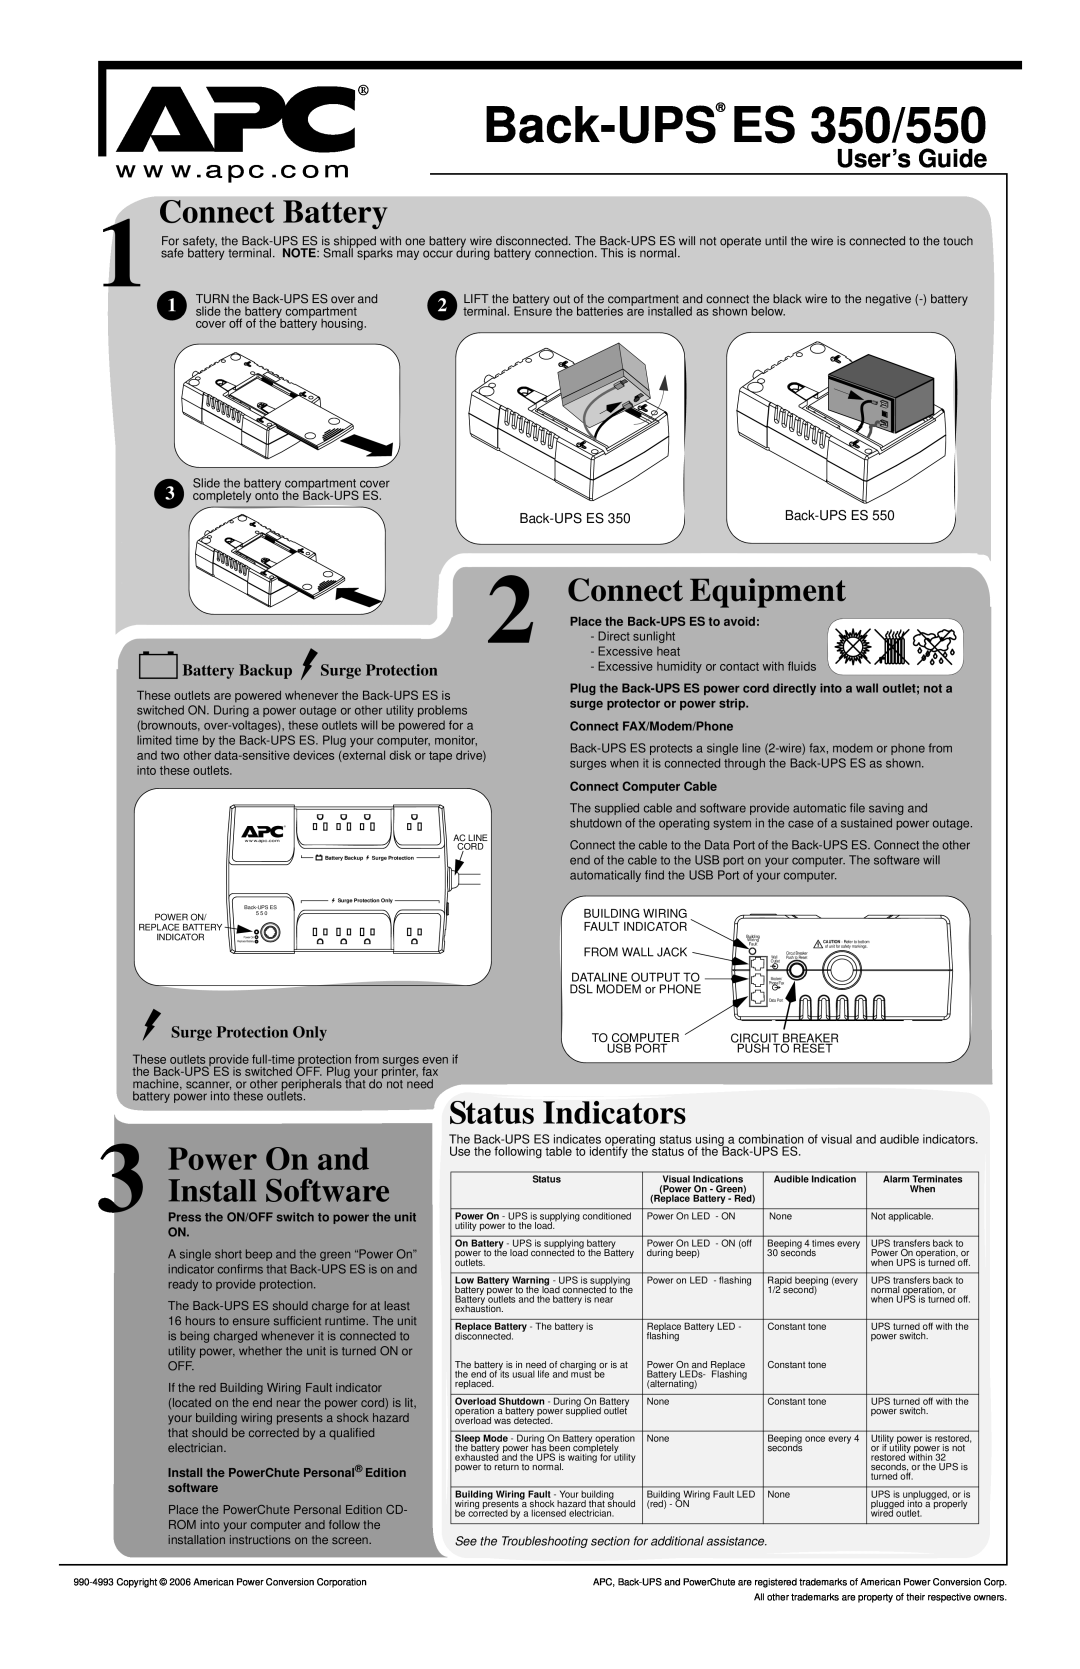 American Power Conversion installation instructions User’s Guide, Back-UPS ES 350/550, Connect Battery, Power On and 